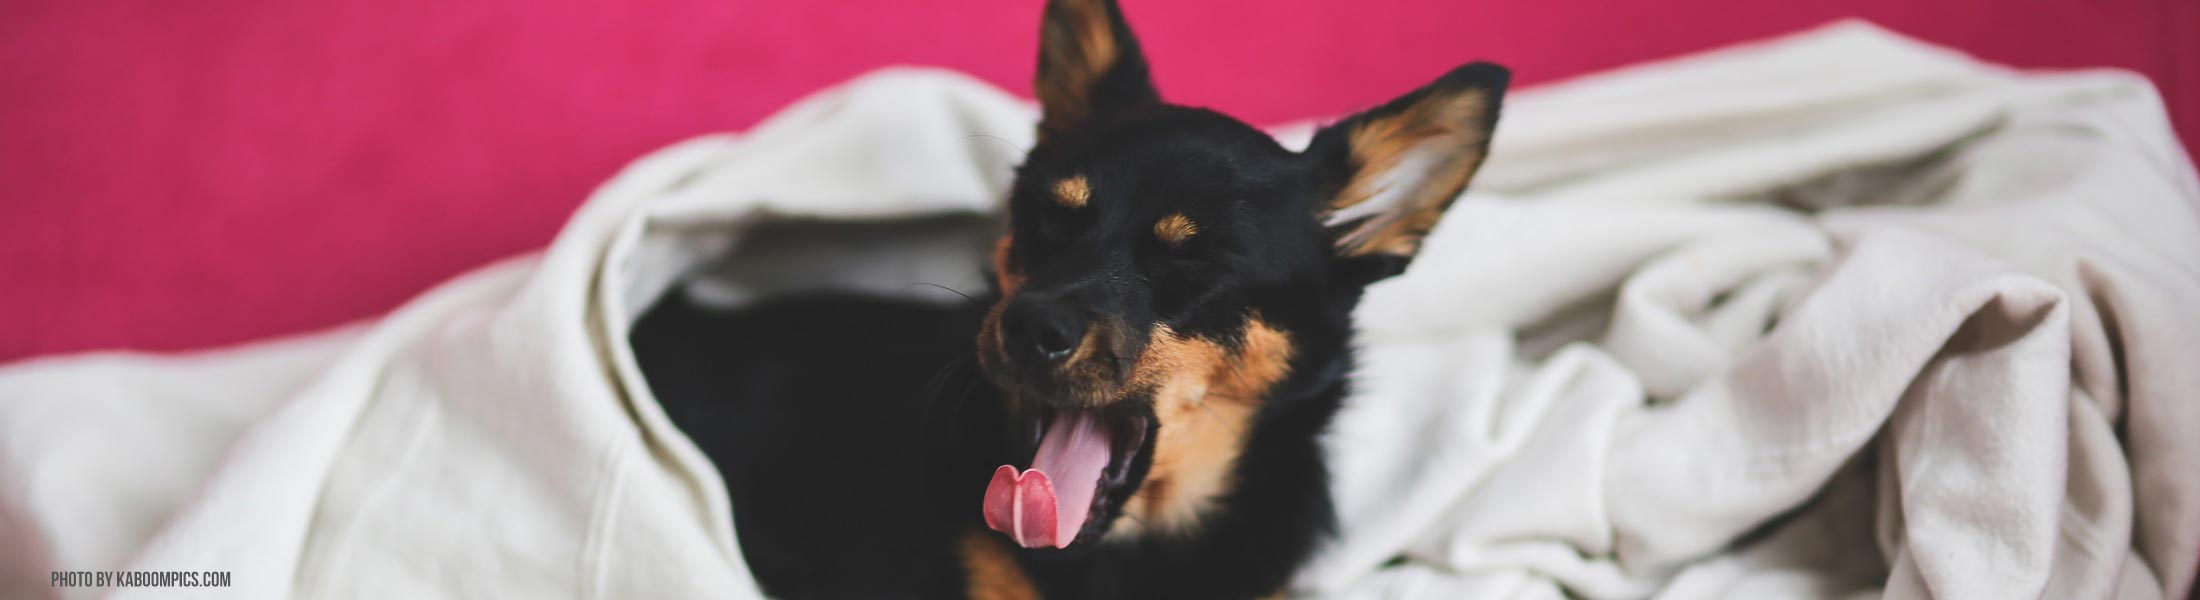 This dog is yawning because it is close to nap time.